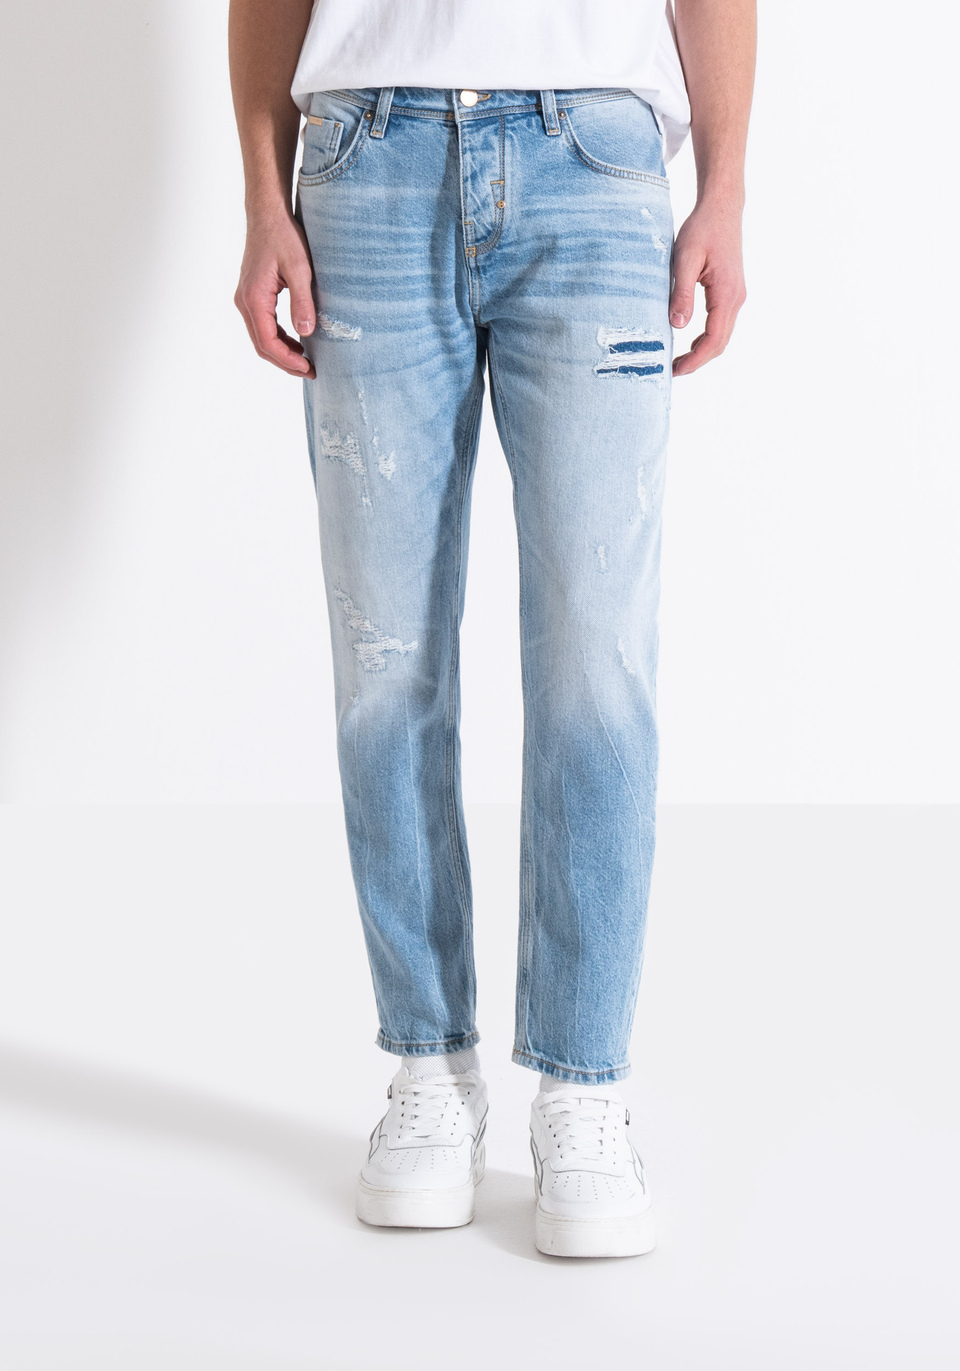 ARGON SLIM ANKLE LENGTH FIT JEANS IN BLUE COMFORT DENIM WITH AUTHENTIC LOOK